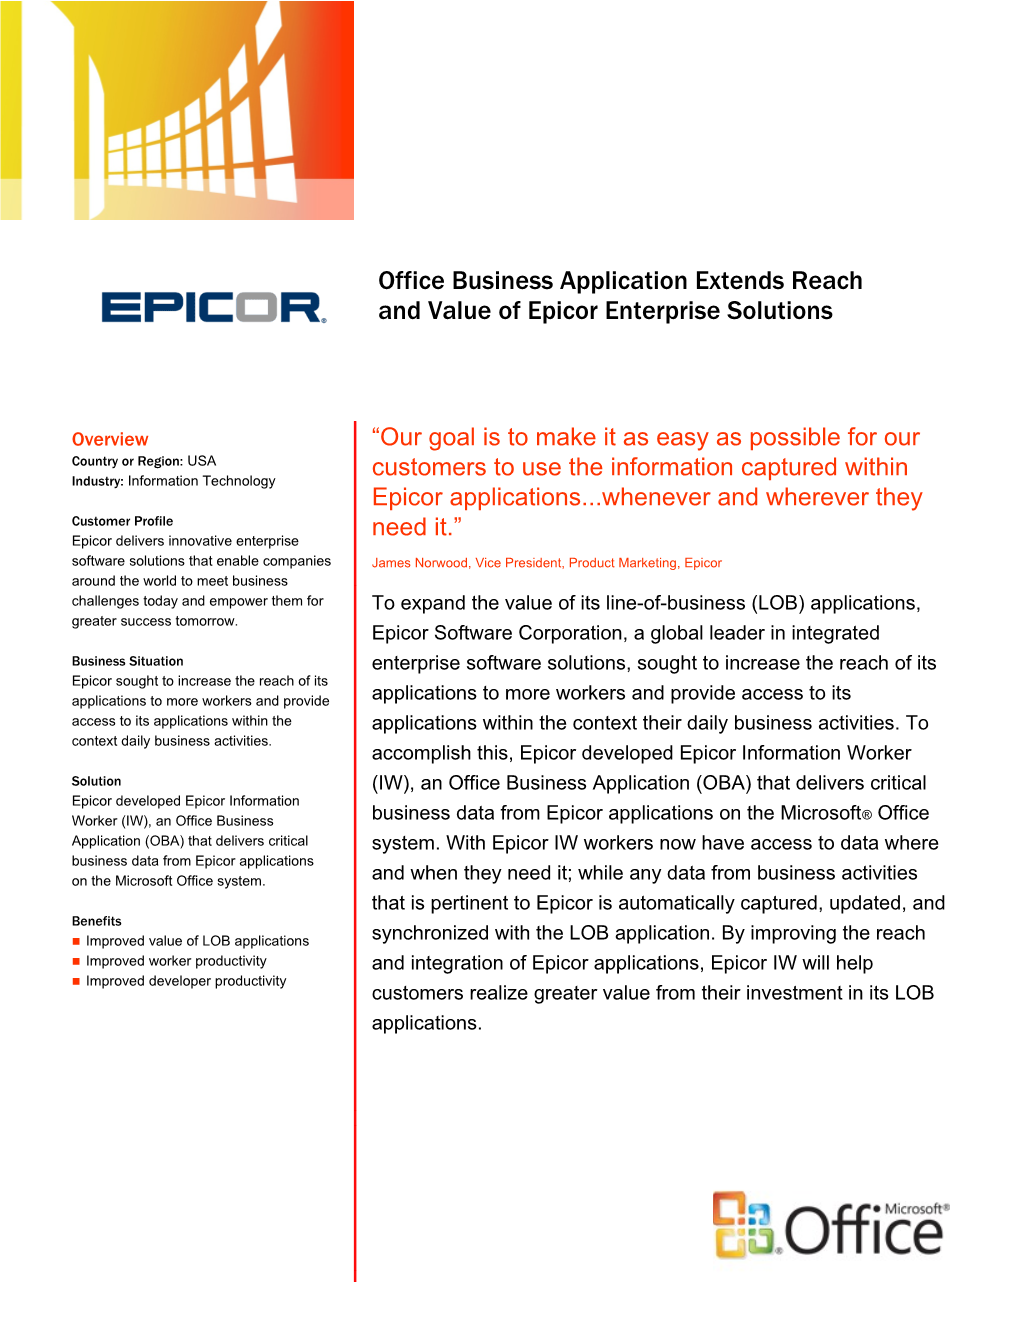 Writeimage CEP Office Business Application Extends Reach and Value of Epicor Enterprise